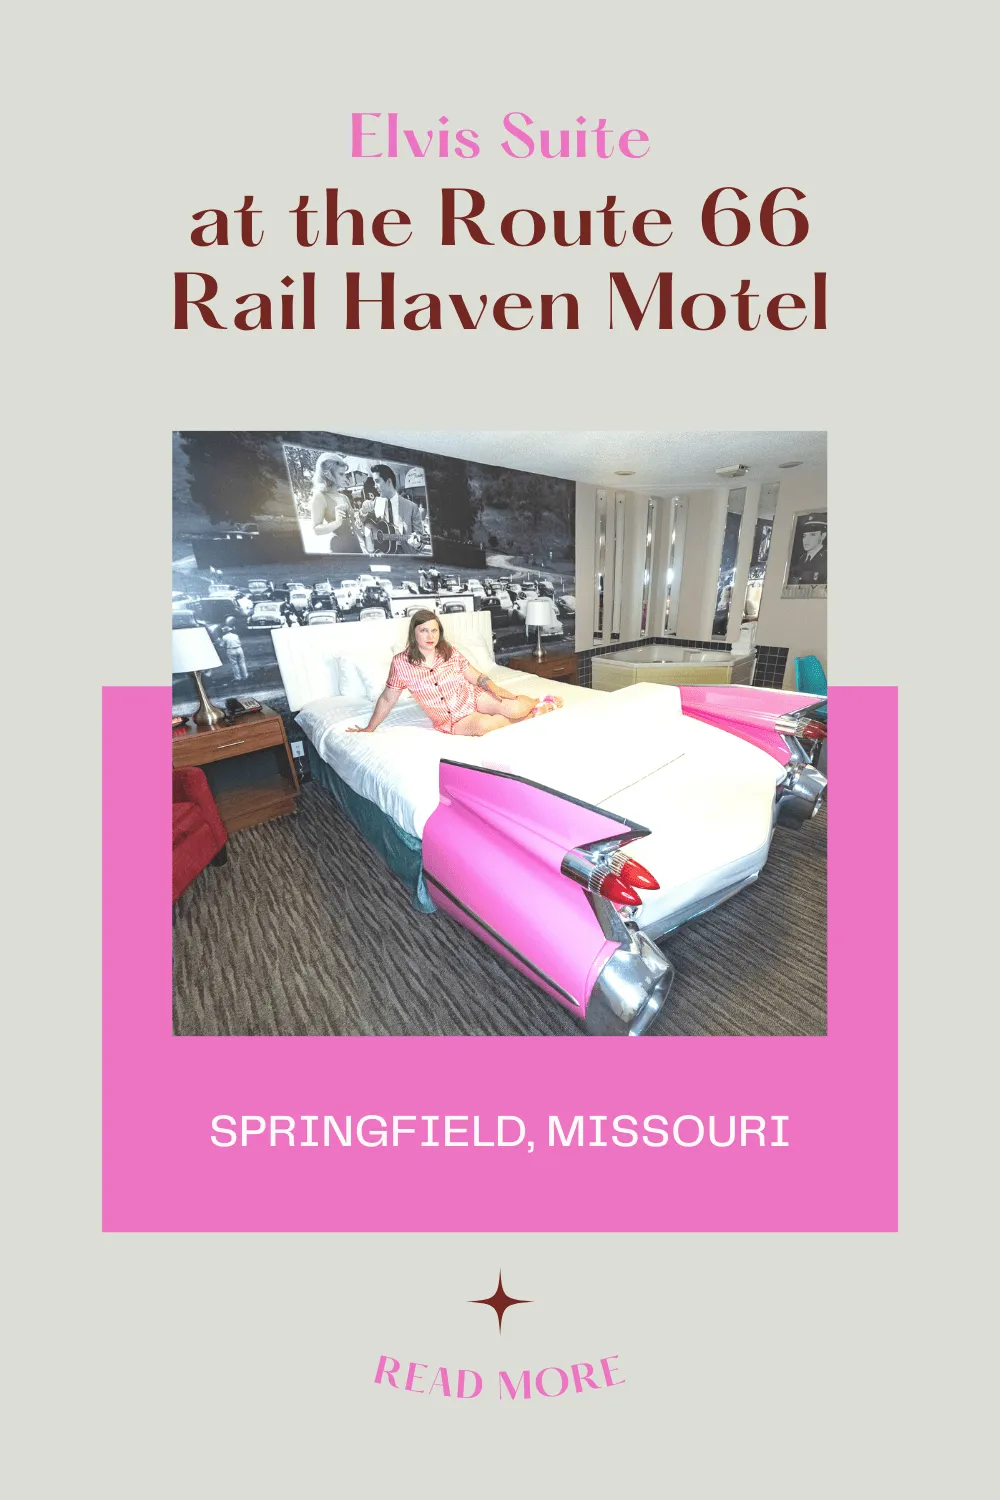 Sleep like a king on your Route 66 road trip! And not just any king. The king of rock 'n' roll. The Elvis Suite at the Route 66 Rail Haven Motel in Springfield, Missouri pays homage to the artist, Elvis Presley, who once actually slept in this room.  #RoadTrips #RoadTripStop #Route66 #Route66RoadTrip #MissouriRoute66 #Missouri #MissouriRoadTrip #MissouriRoadsideAttractions #RoadsideAttractions #RoadsideAttraction #RoadsideAmerica #RoadTrip #Elvis